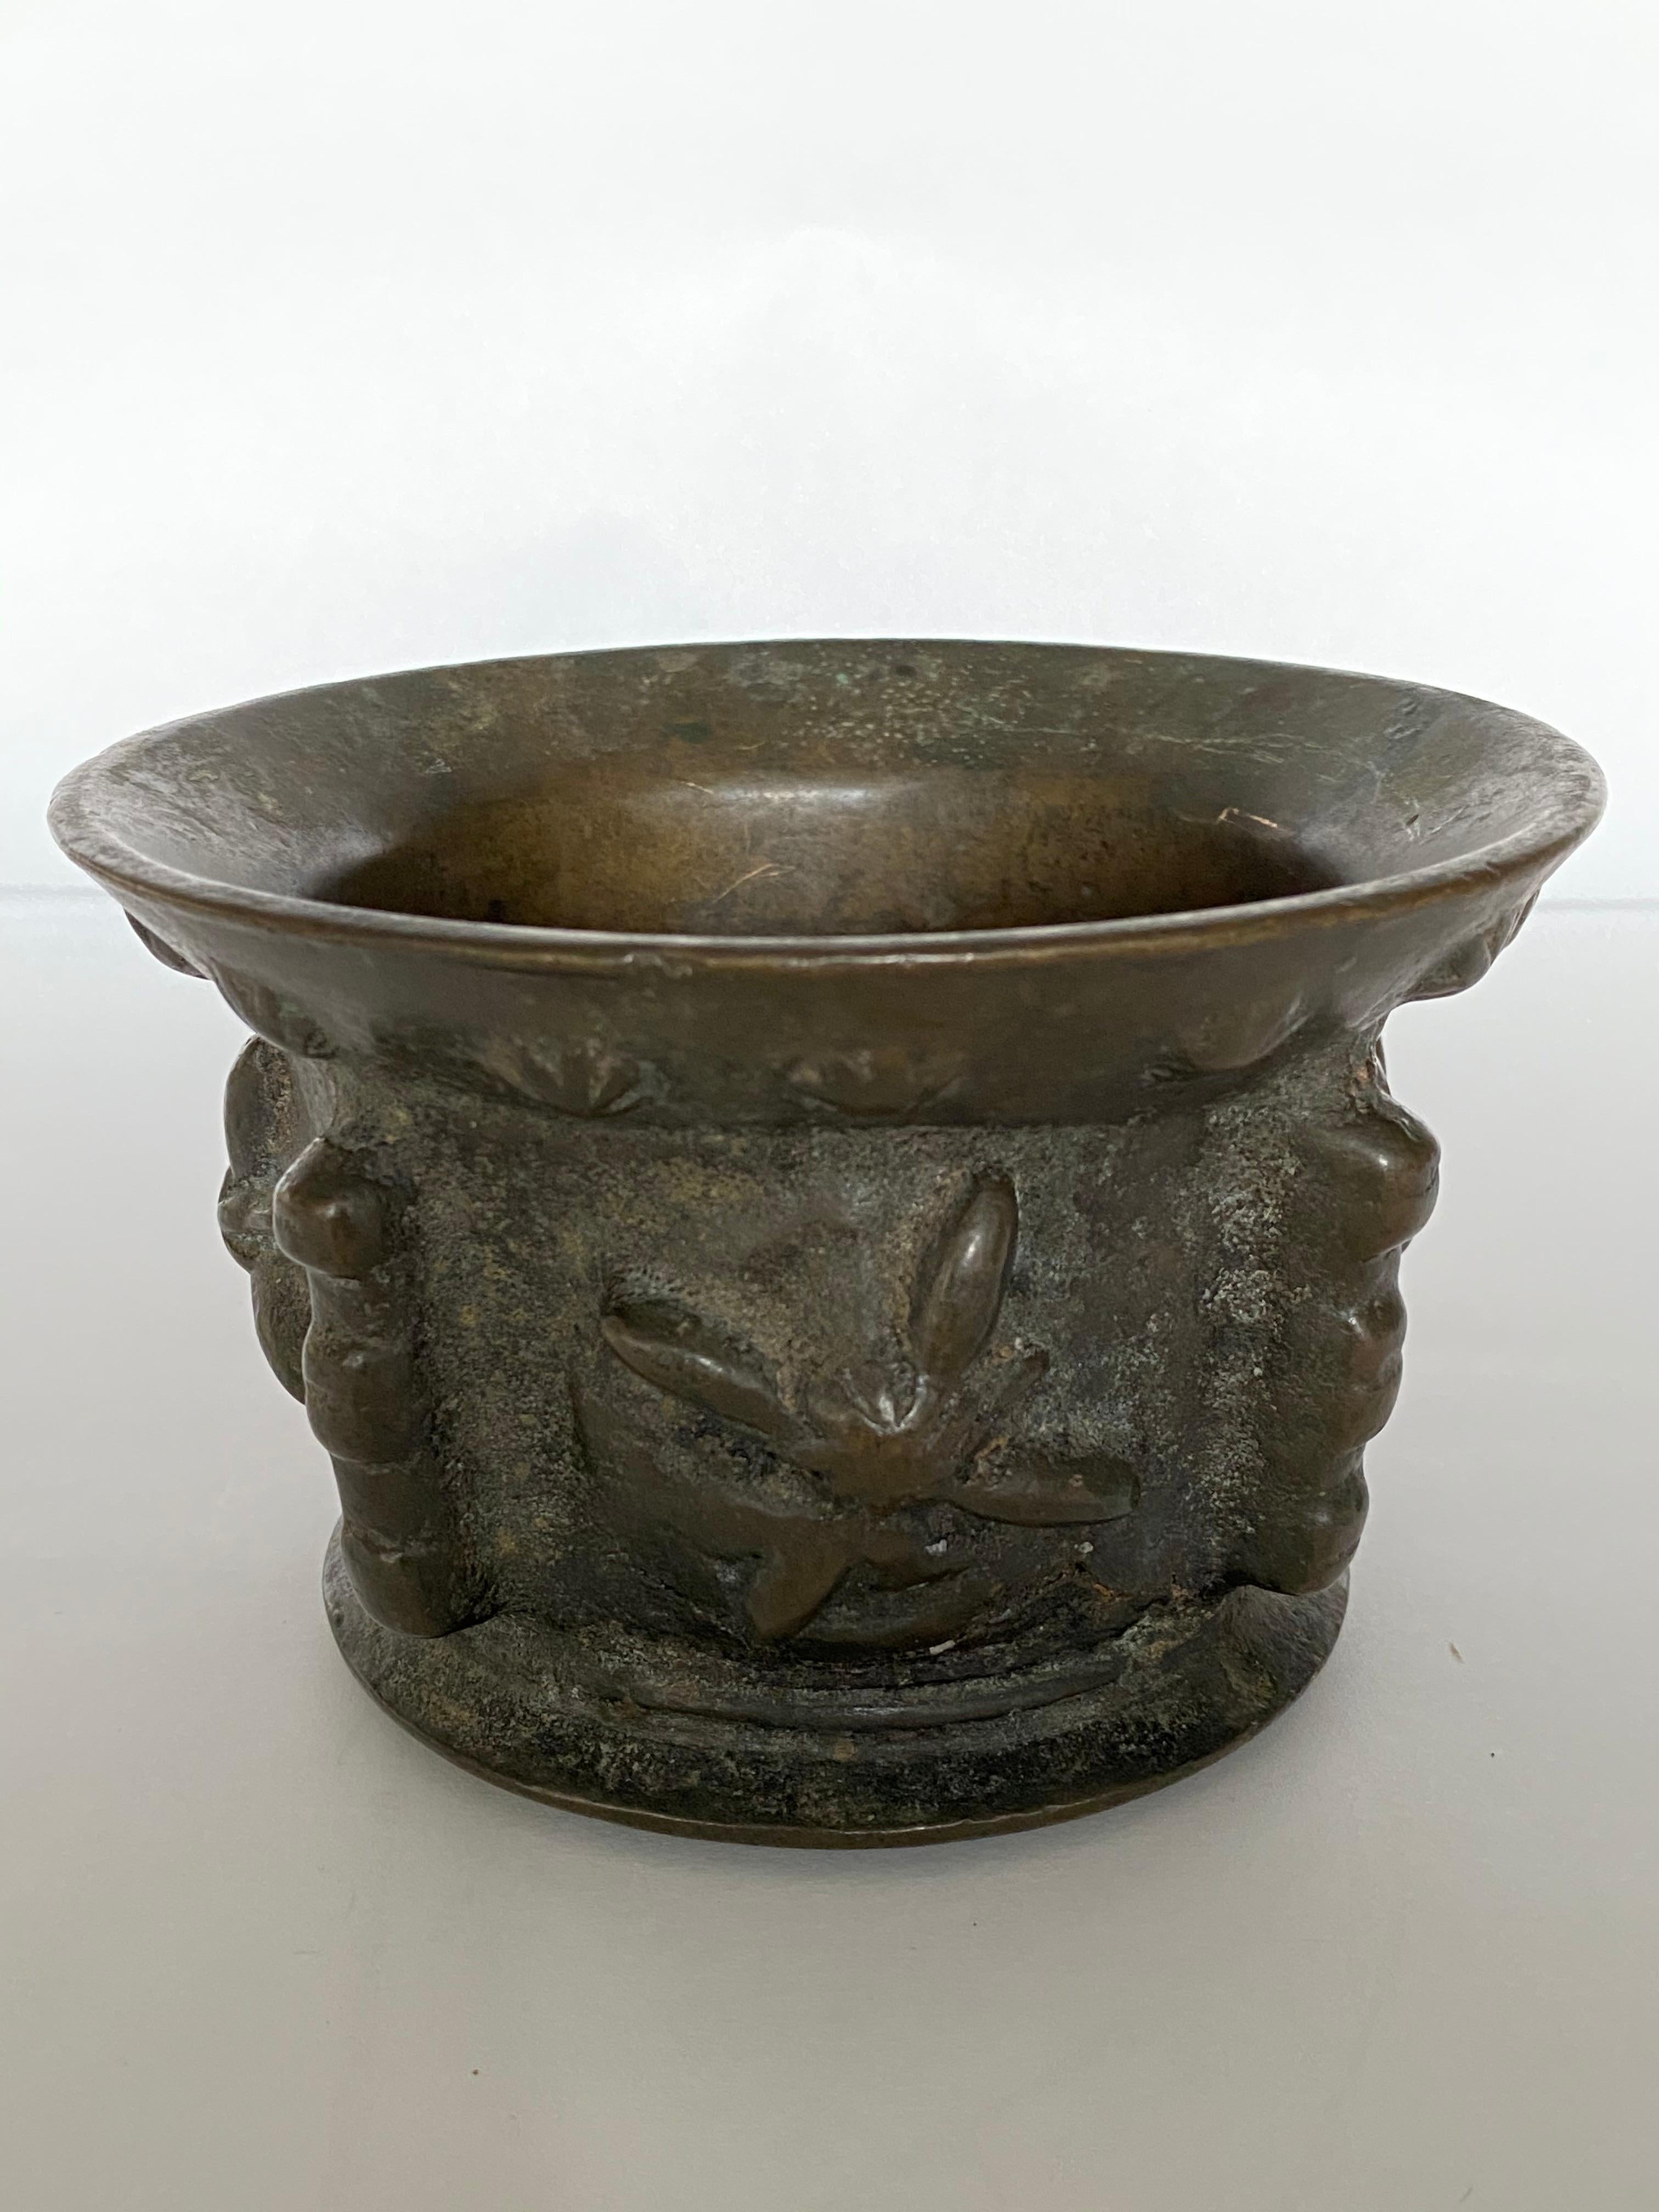 This rare example of a Renaissance bronze mortar is decorated with starbursts all along the everted rim and features 4 large starbursts on the sides between the ribbed handles. The convex bottom indicates active use, most likely in a pharmacy or by